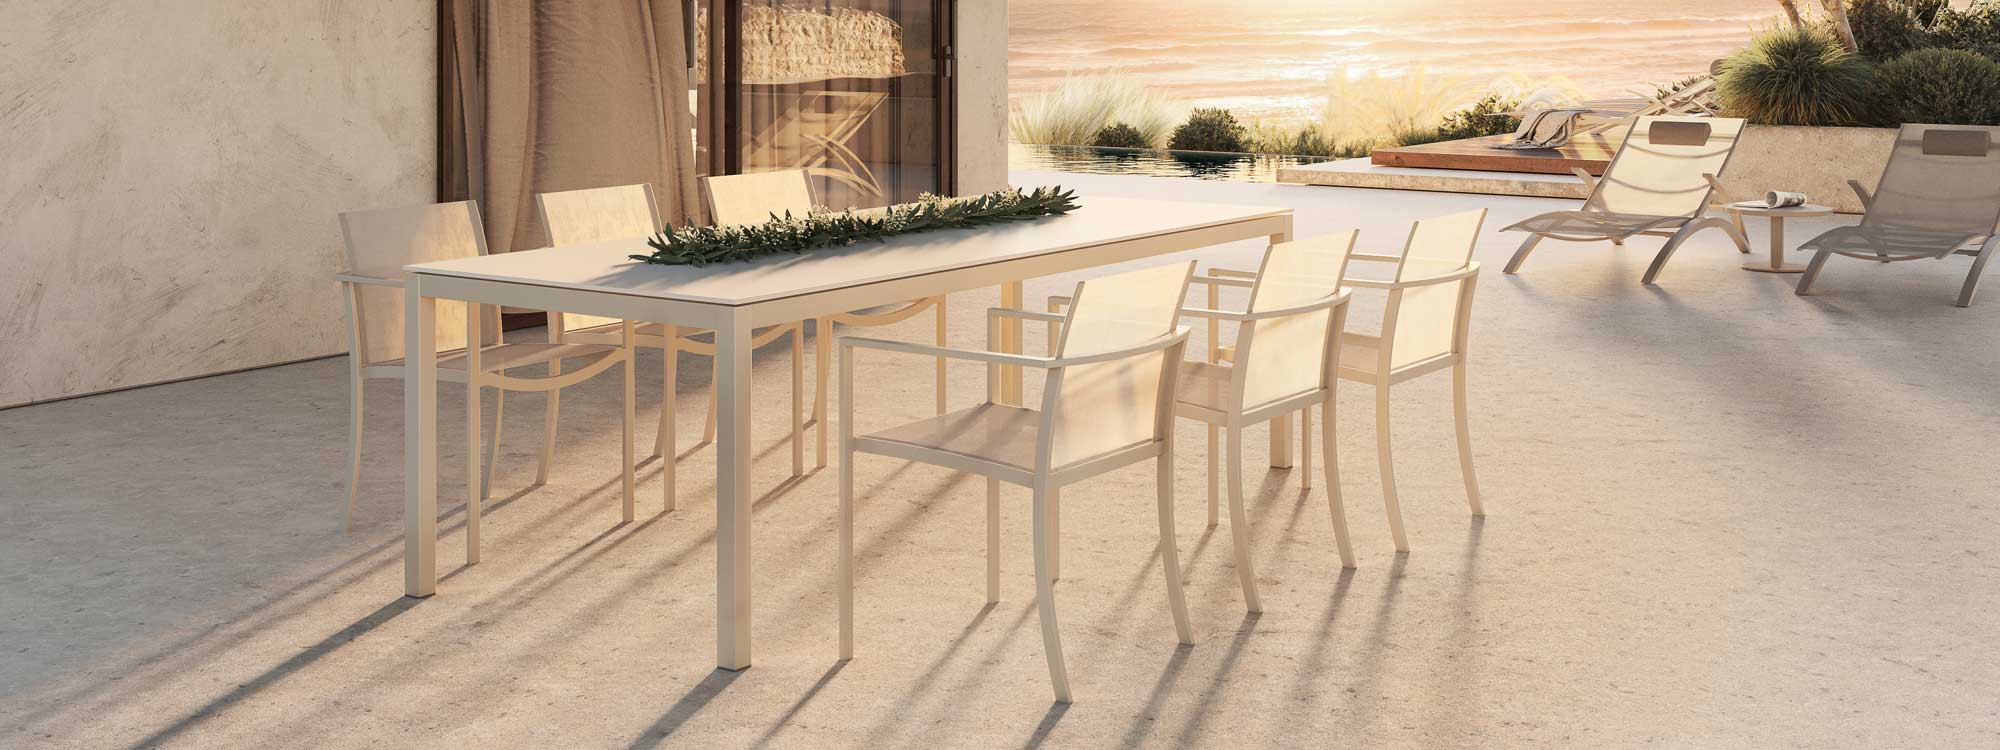 image showing white luxury garden chair and table royal Botania